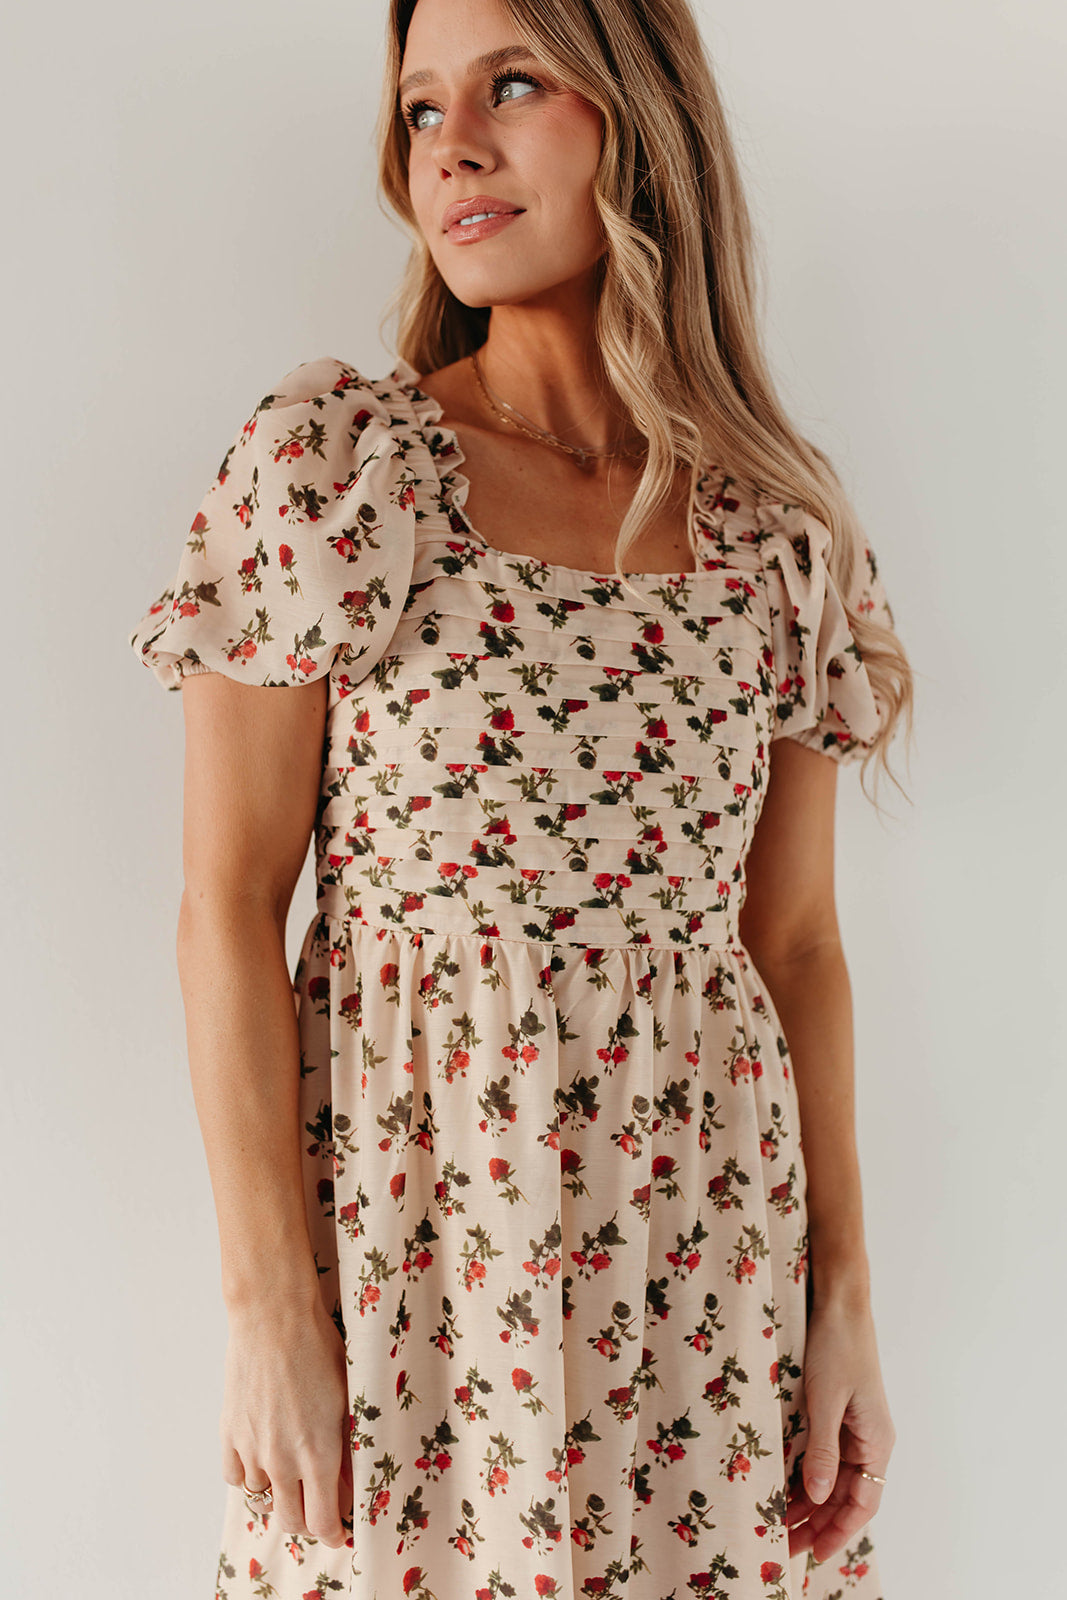 THE ANNALISE MAXI DRESS IN ROSE FLORAL BY PINK DESERT